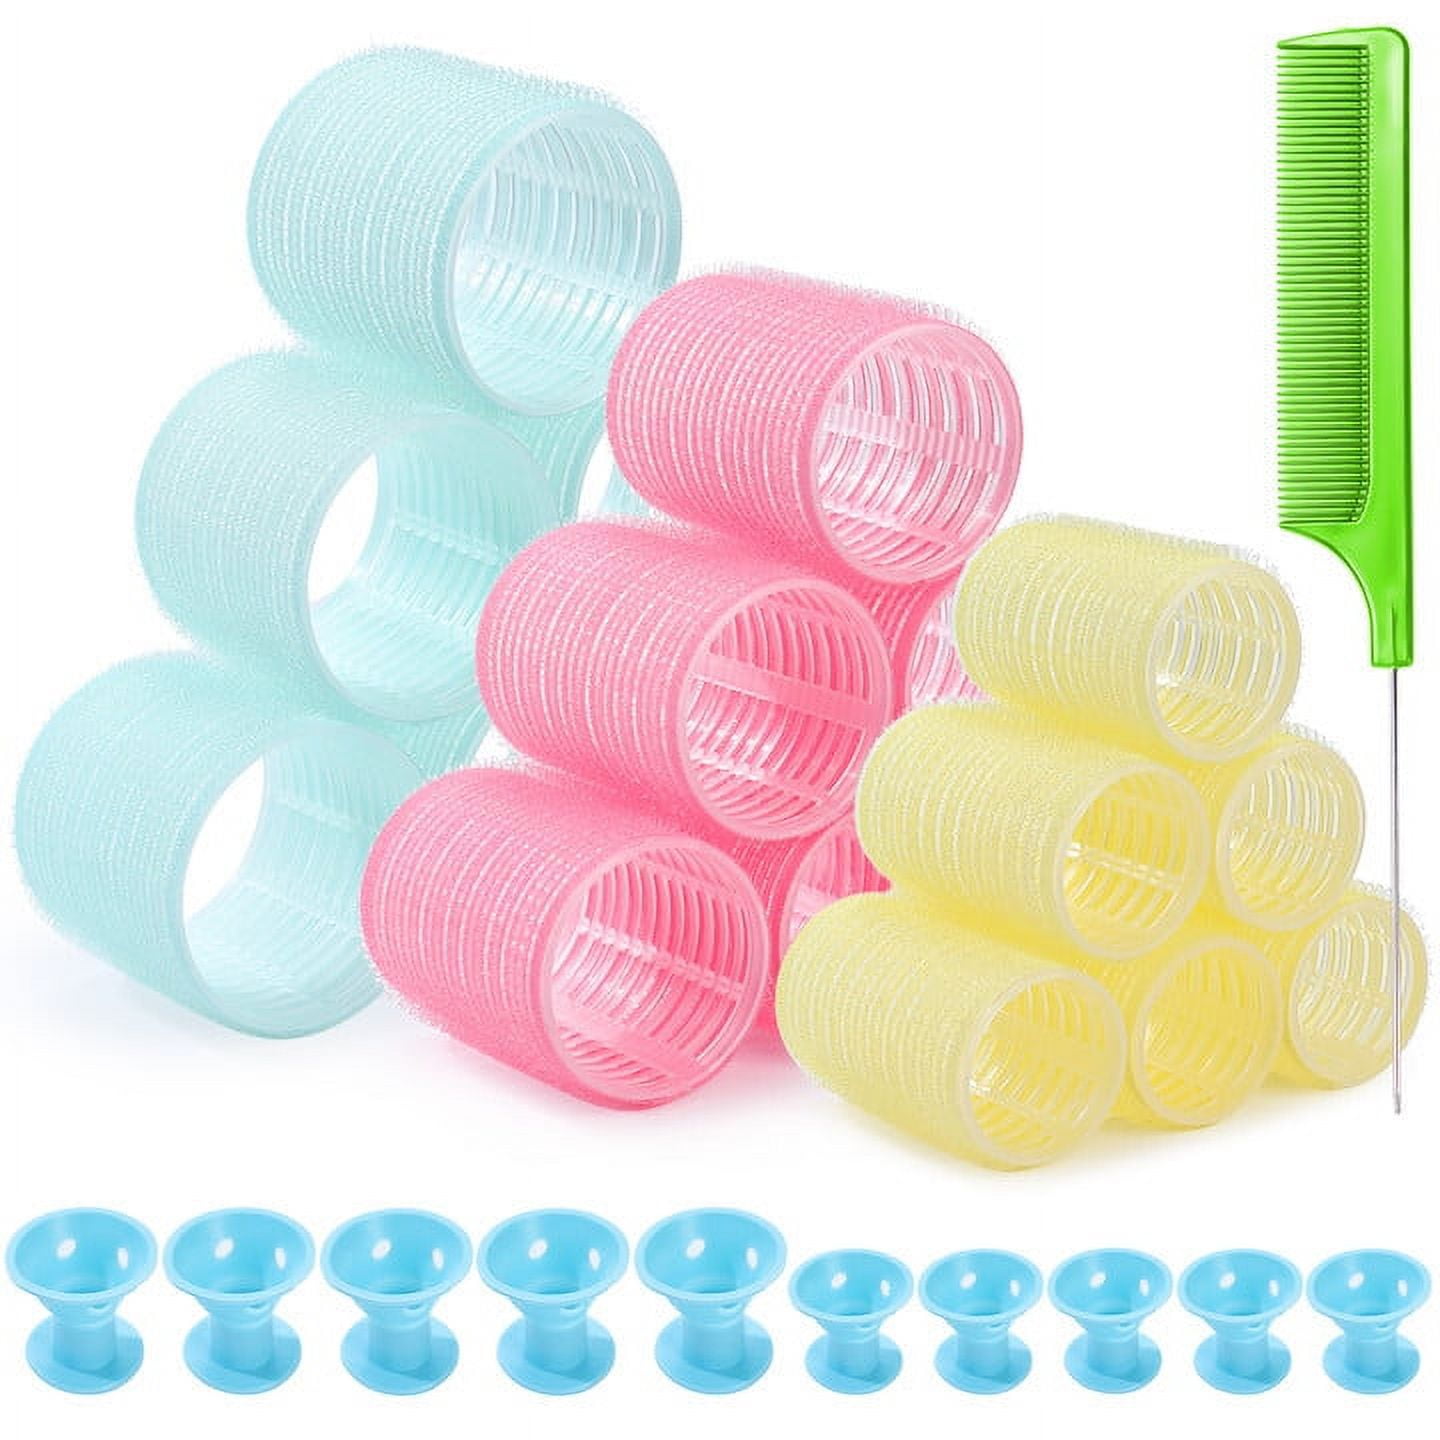 Small Size Hair Rollers Curlers Self Grip Holding Rollers 12 Pcs  Hairdressing Curlers Hair Design Sticky Cling Style For DIY Or Hair Salon  By Topboutique (Gripping Sticky Rollers Multi-color)